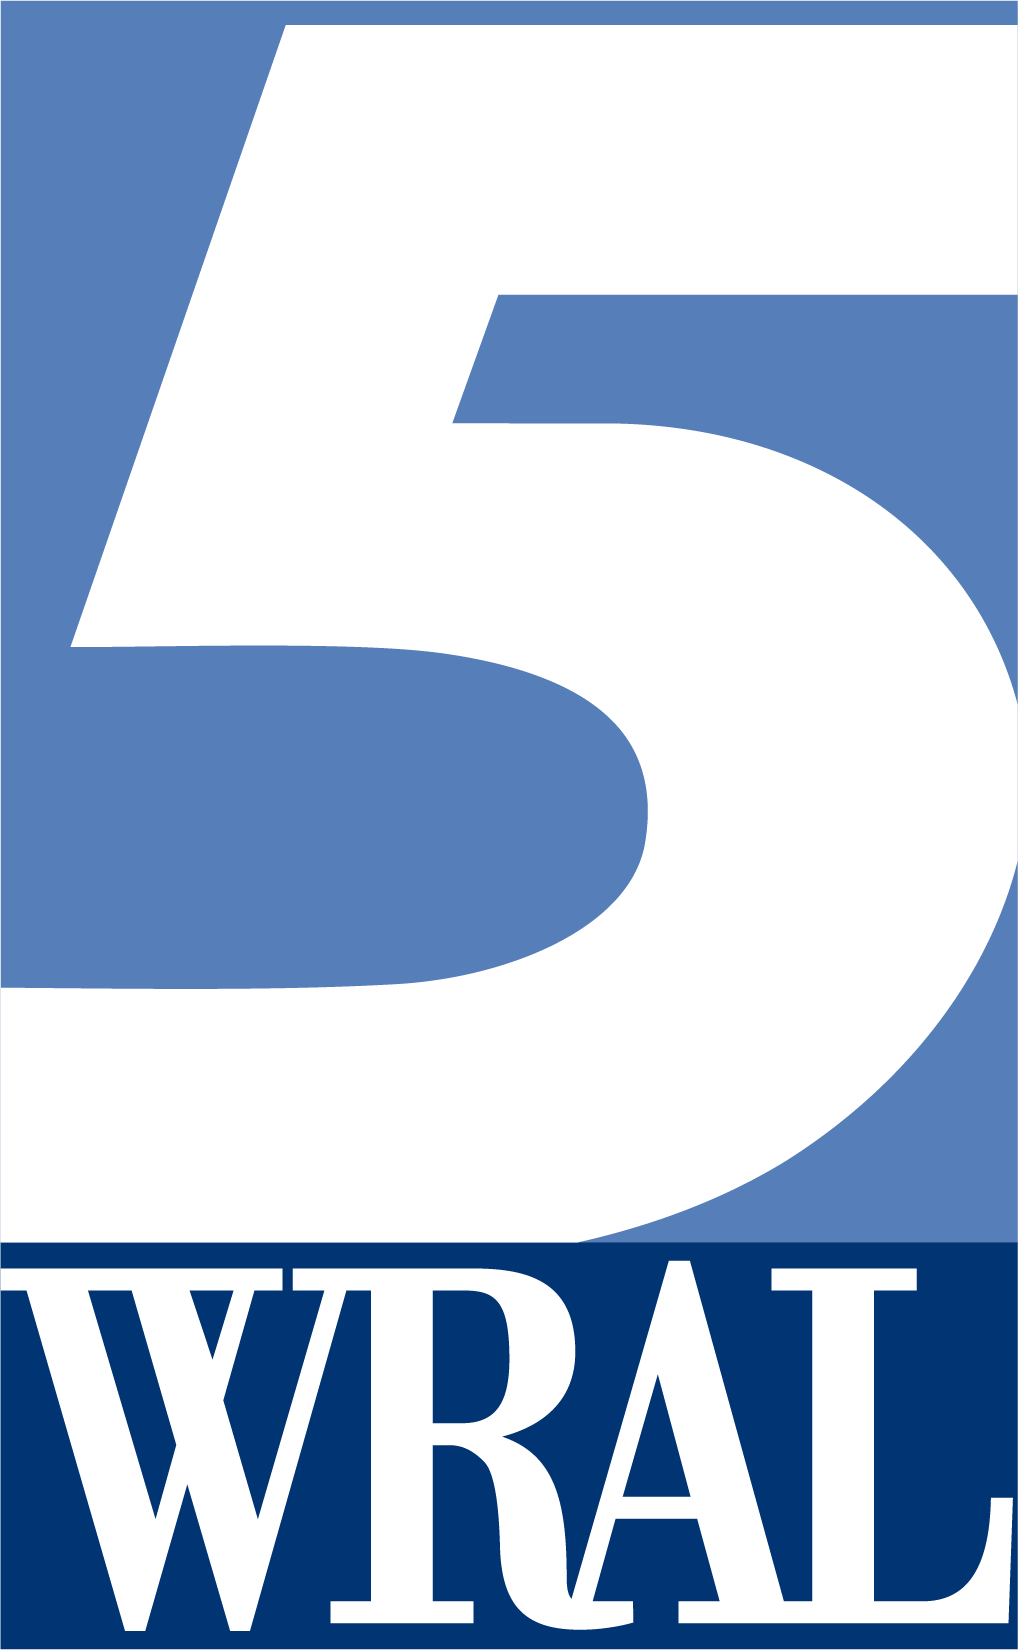 WRAL